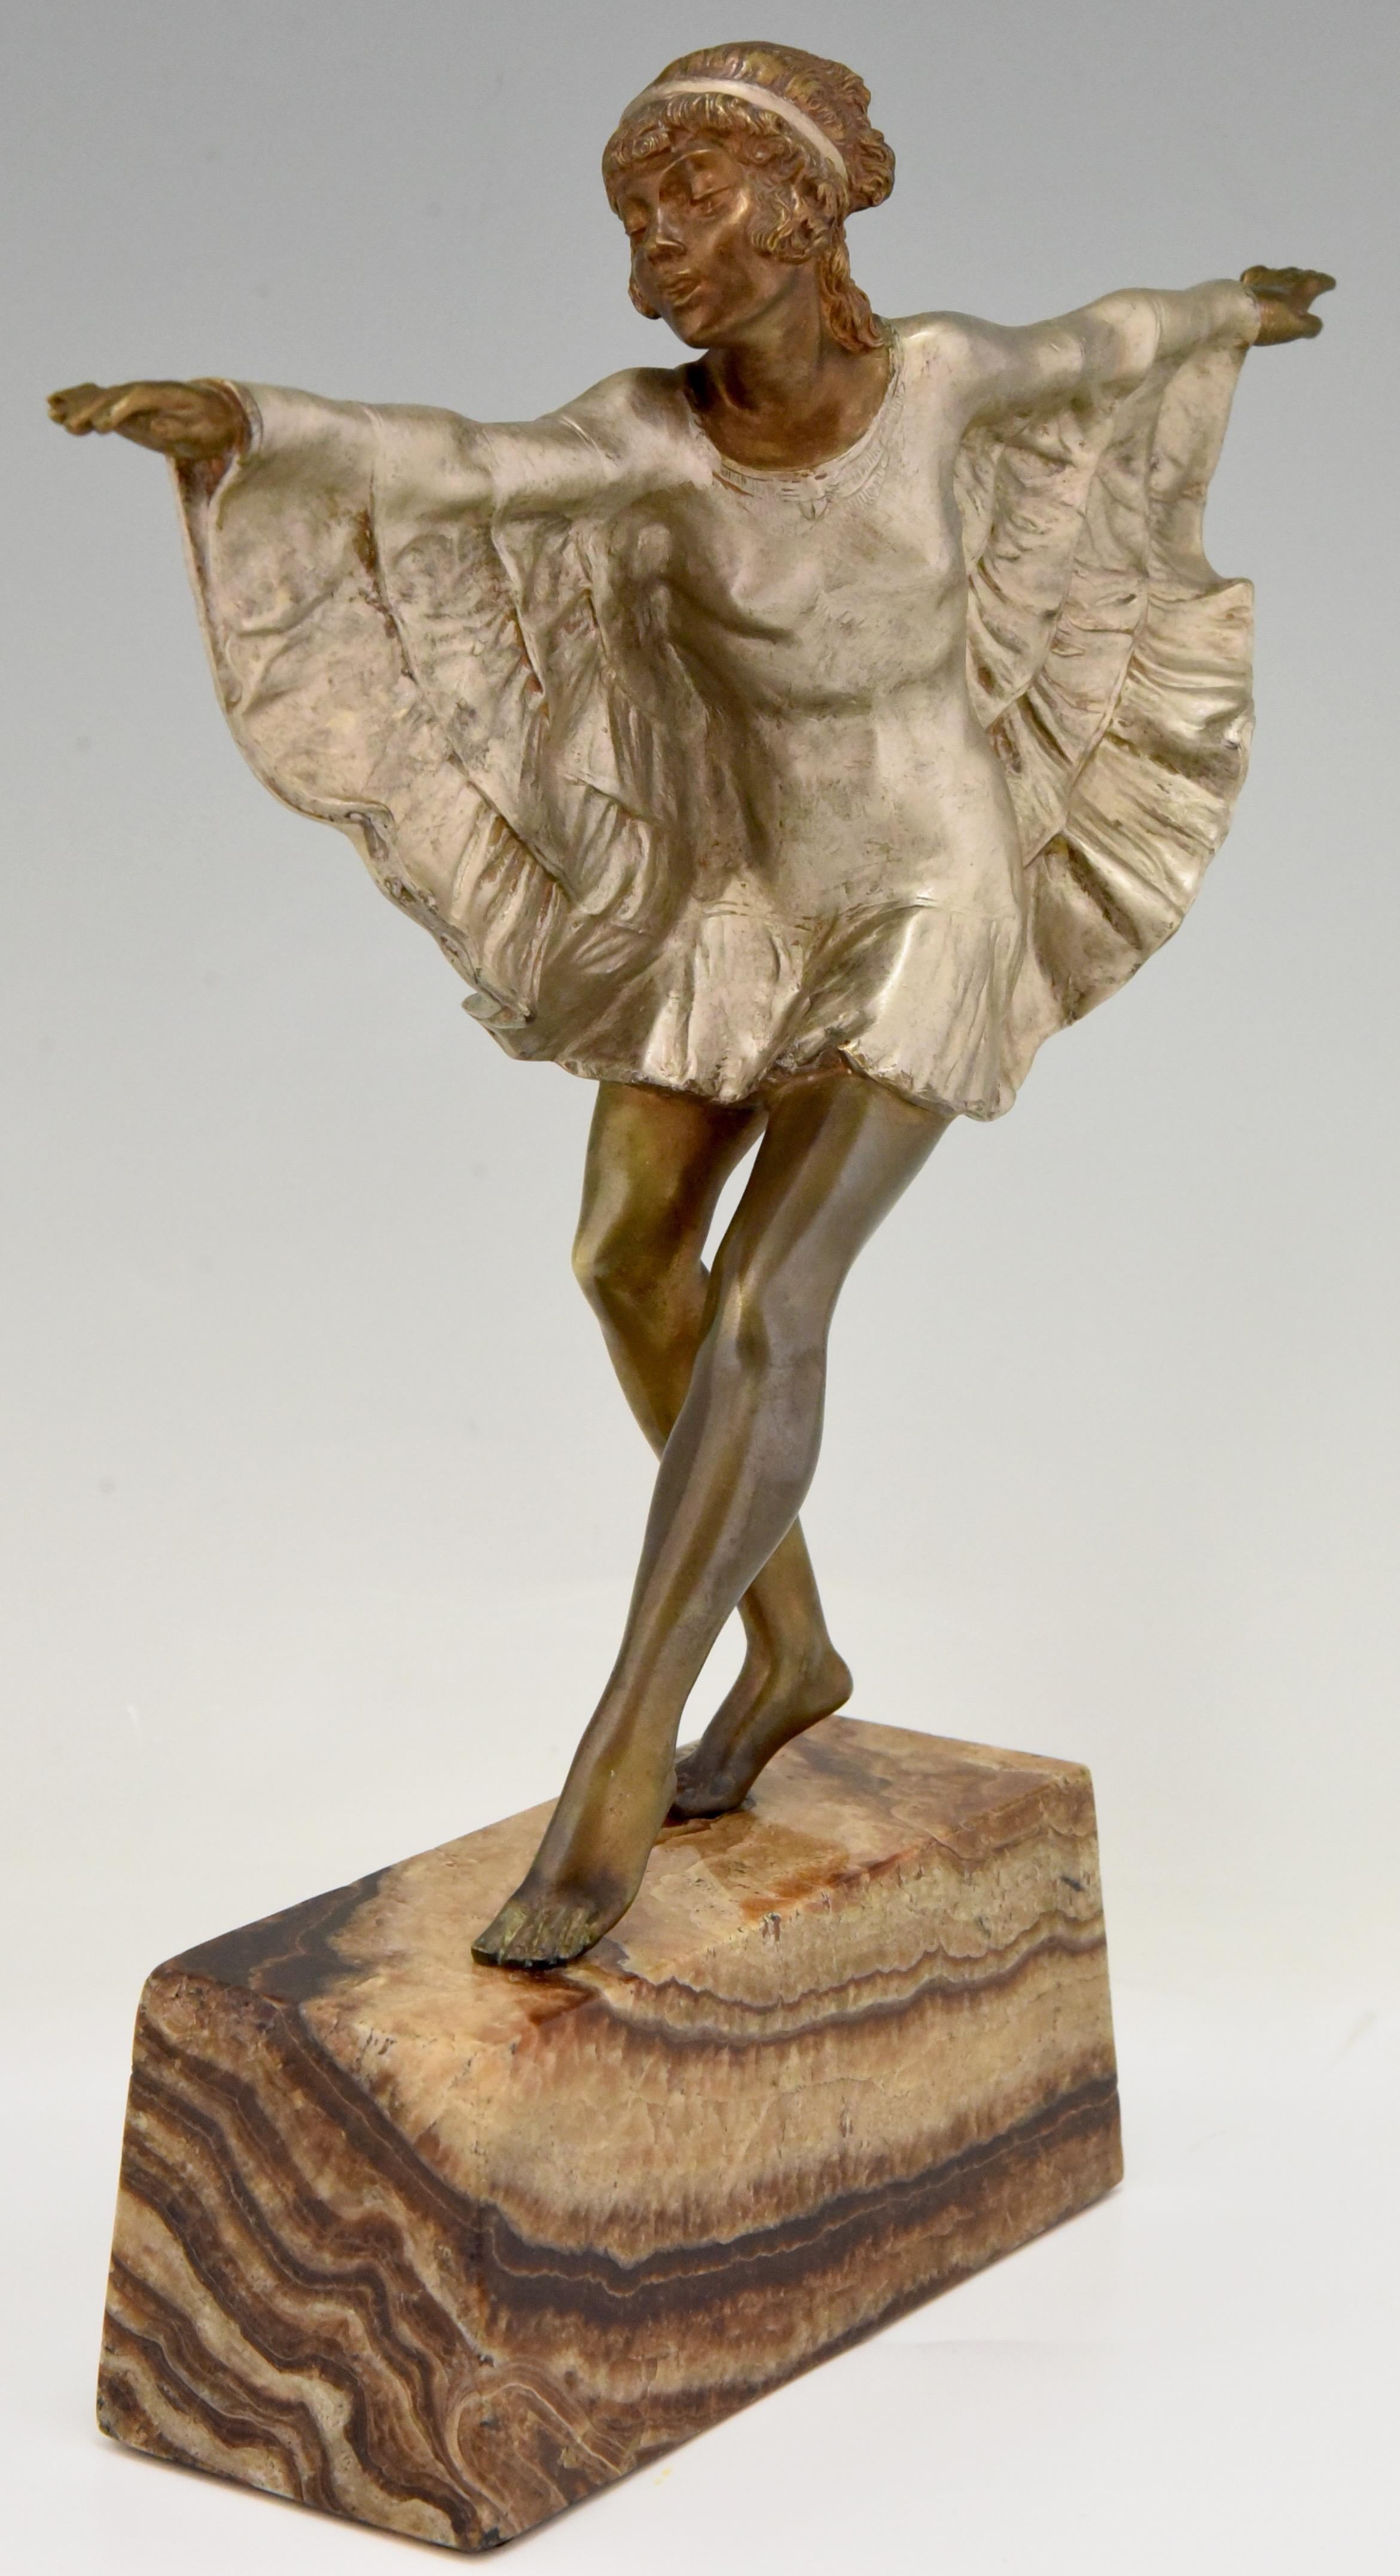 French Art Deco Bronze Sculpture Dancer with Butterfly Dress Marcel Andre Bouraine